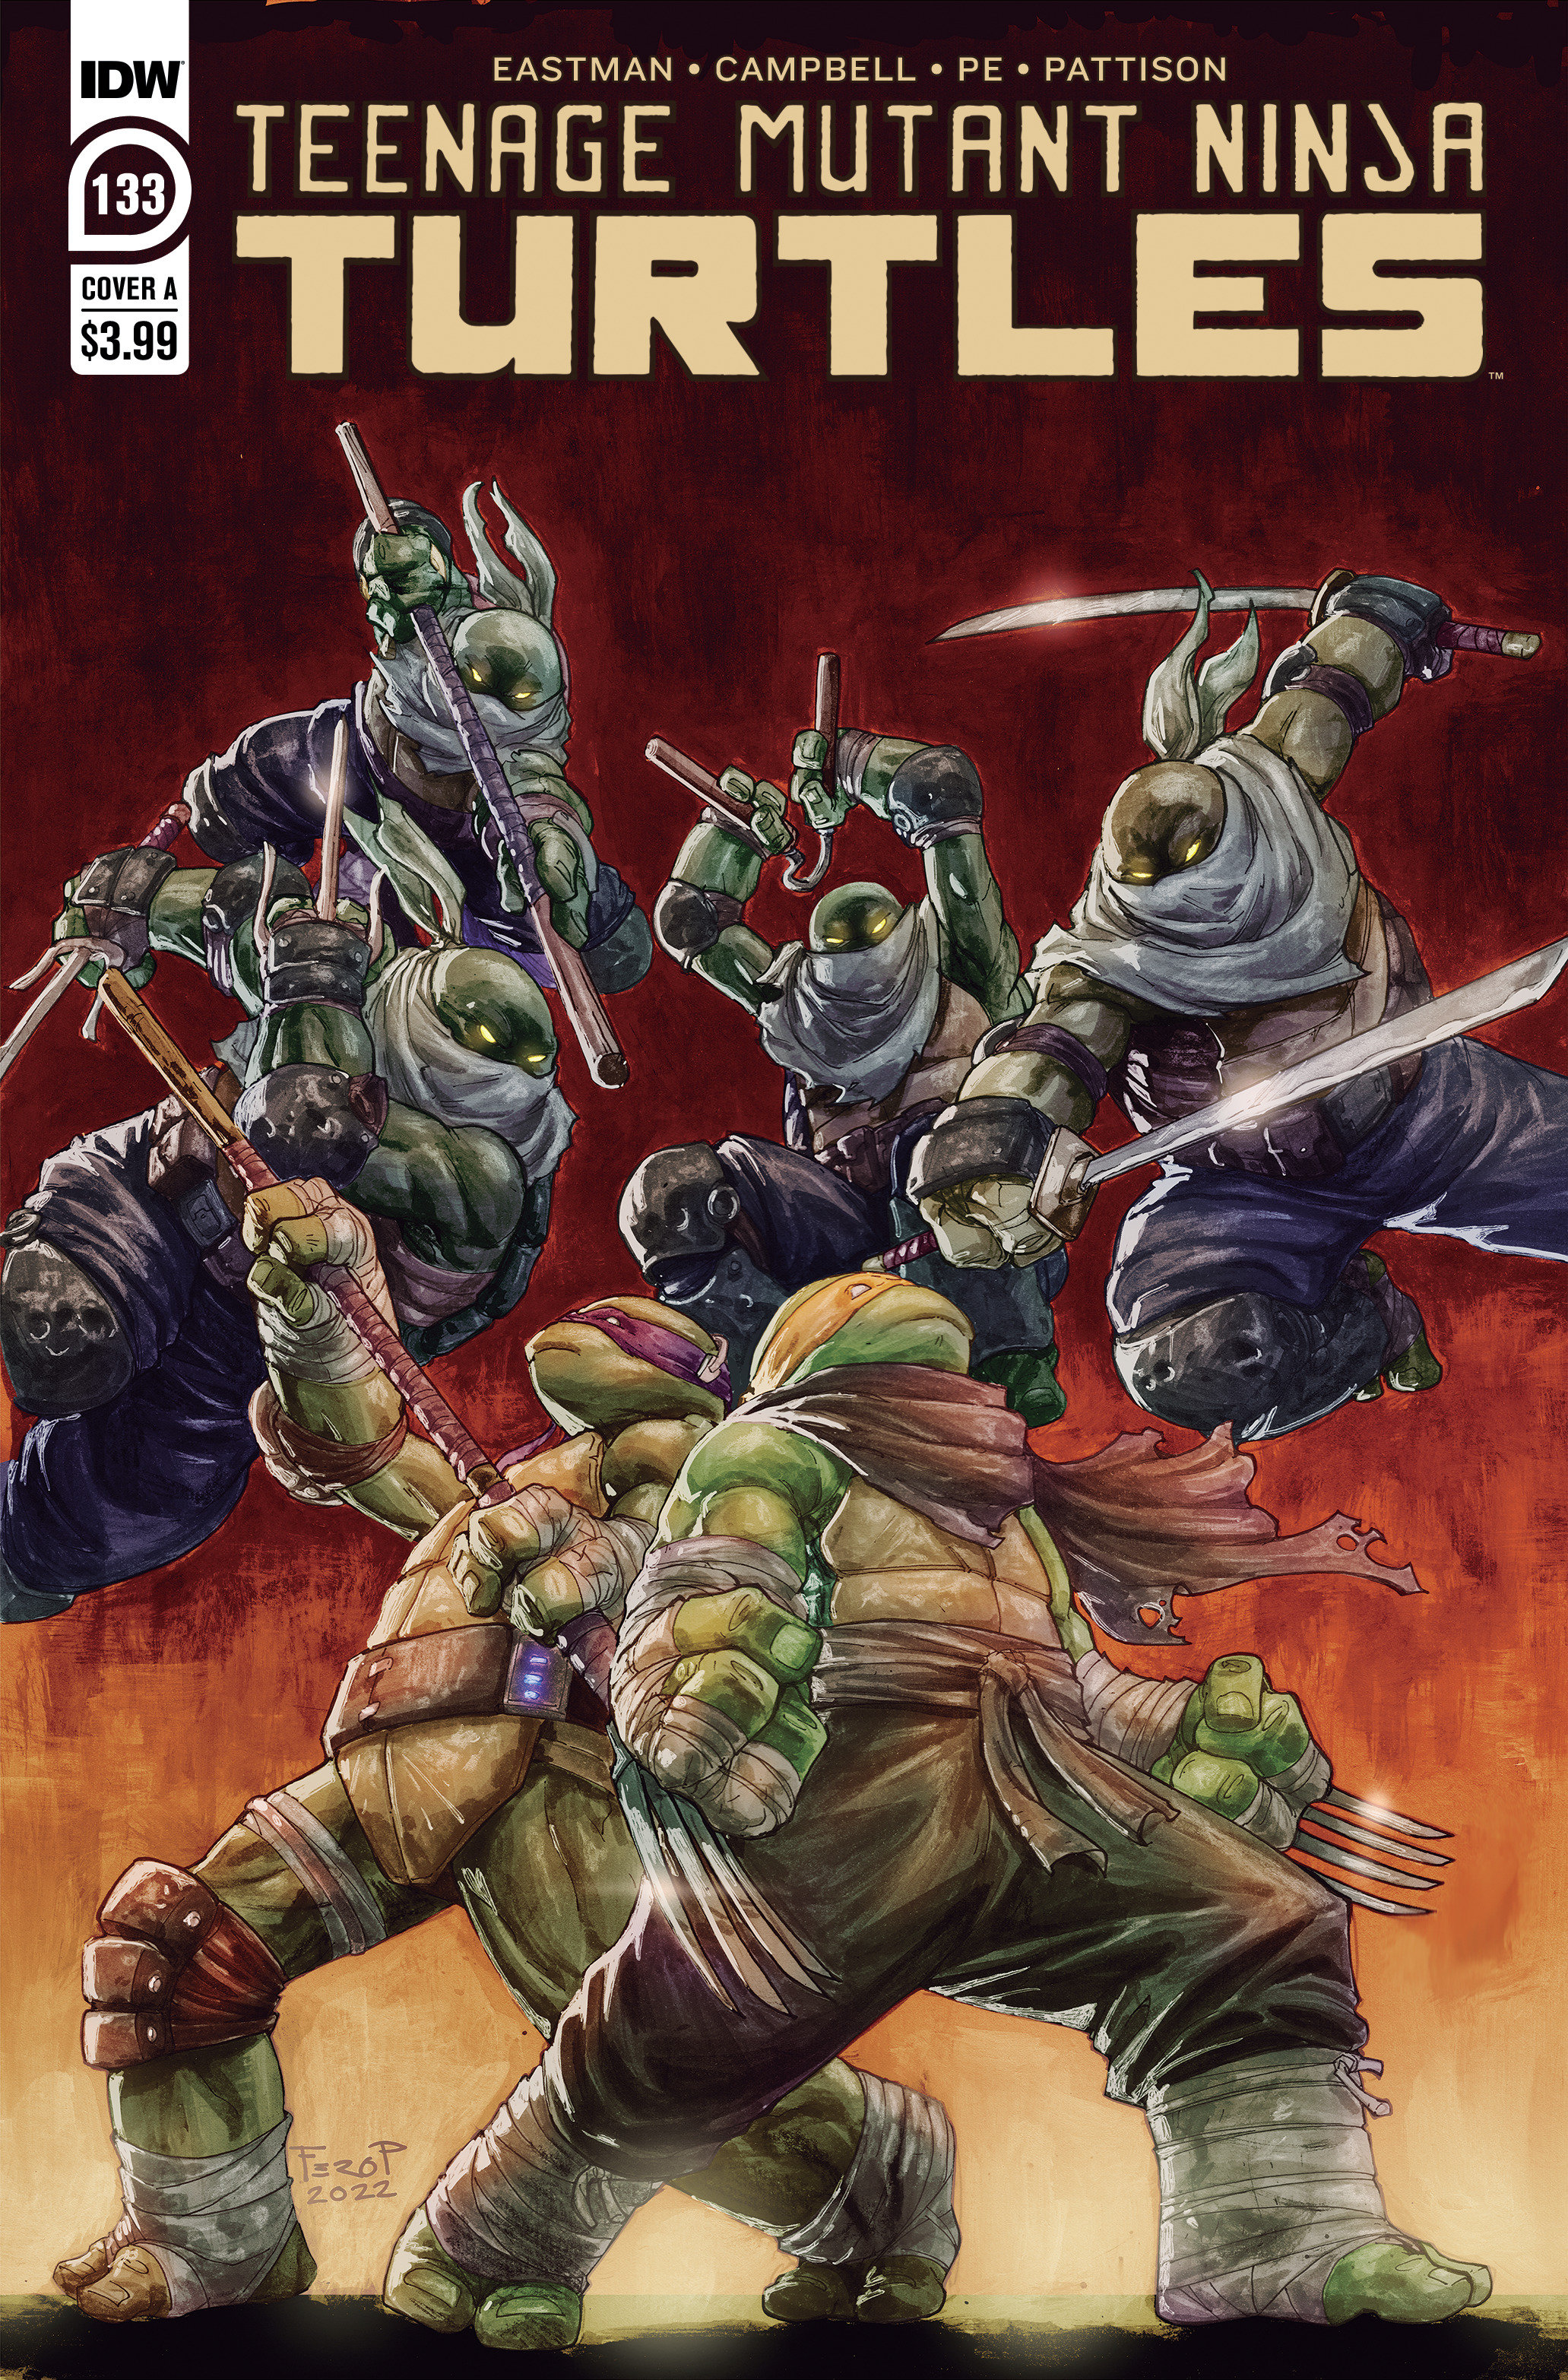 Teenage Mutant Ninja Turtles Ongoing #133 Cover A Peniche (2011)